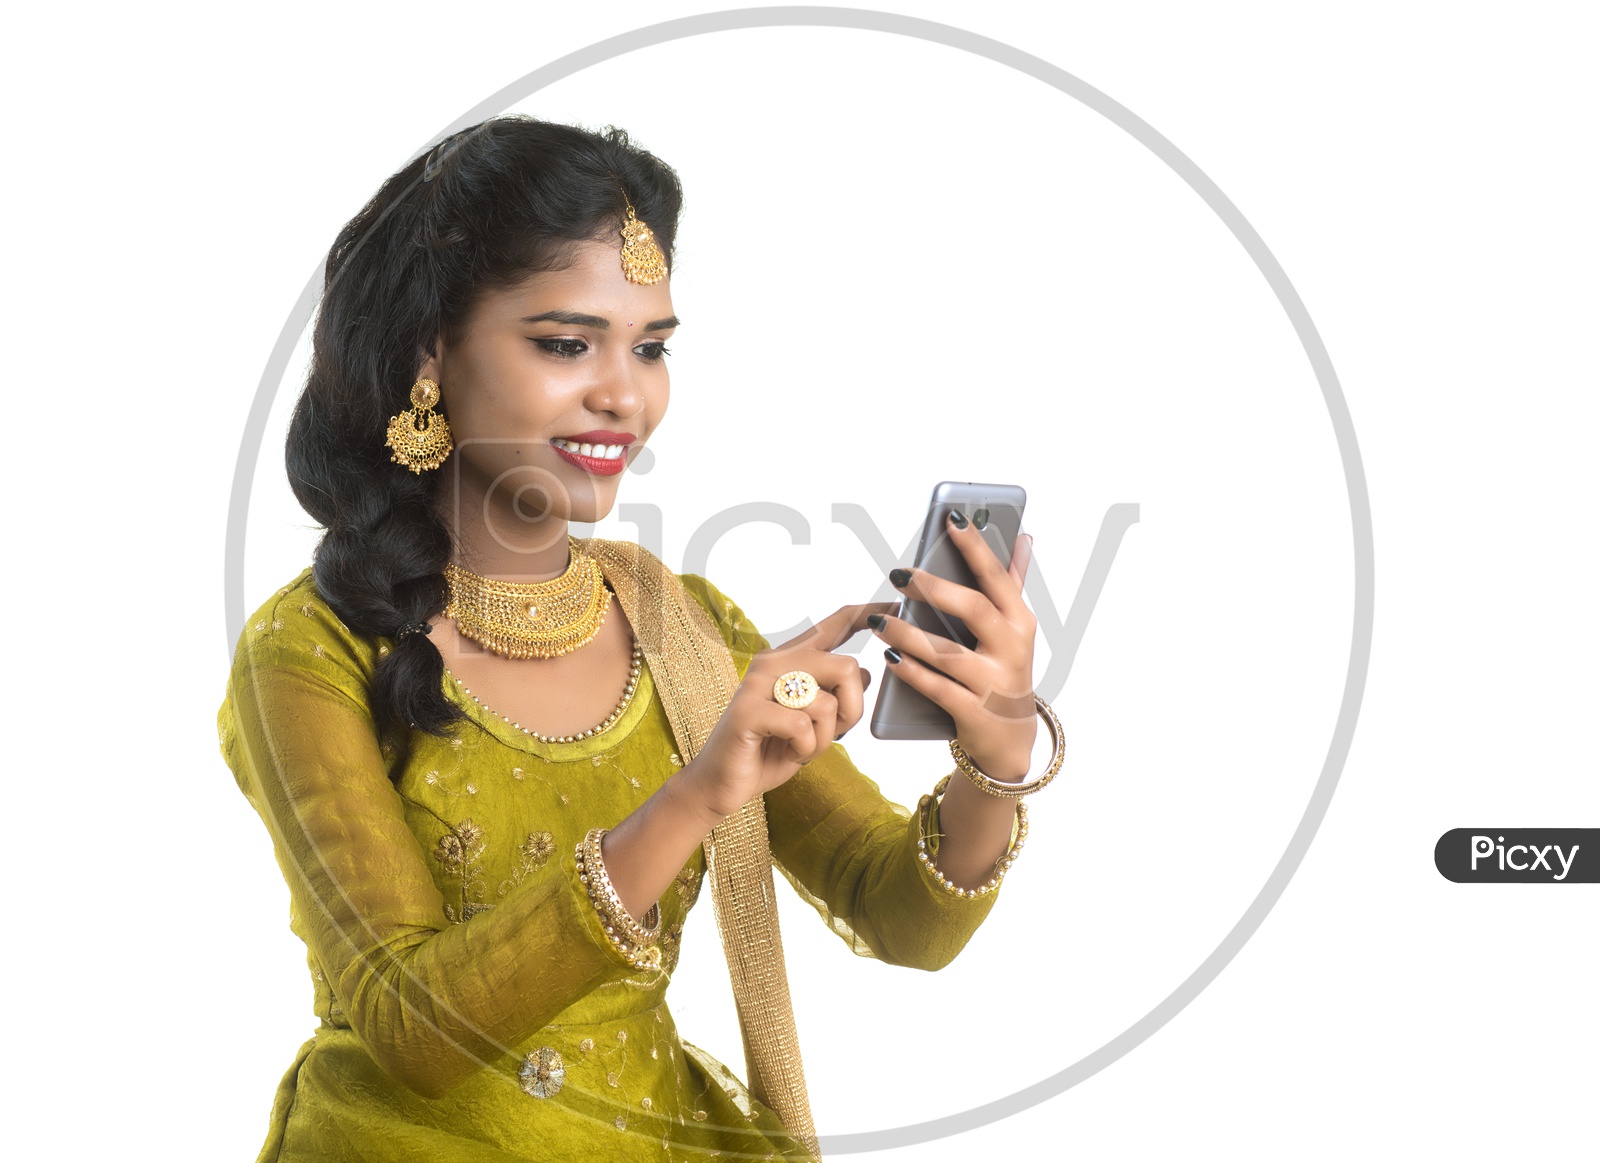 Young Traditional Indian Girl  Using  Mobile phone Or Smart Phone With Smile On Her Face On an Isolated White Background